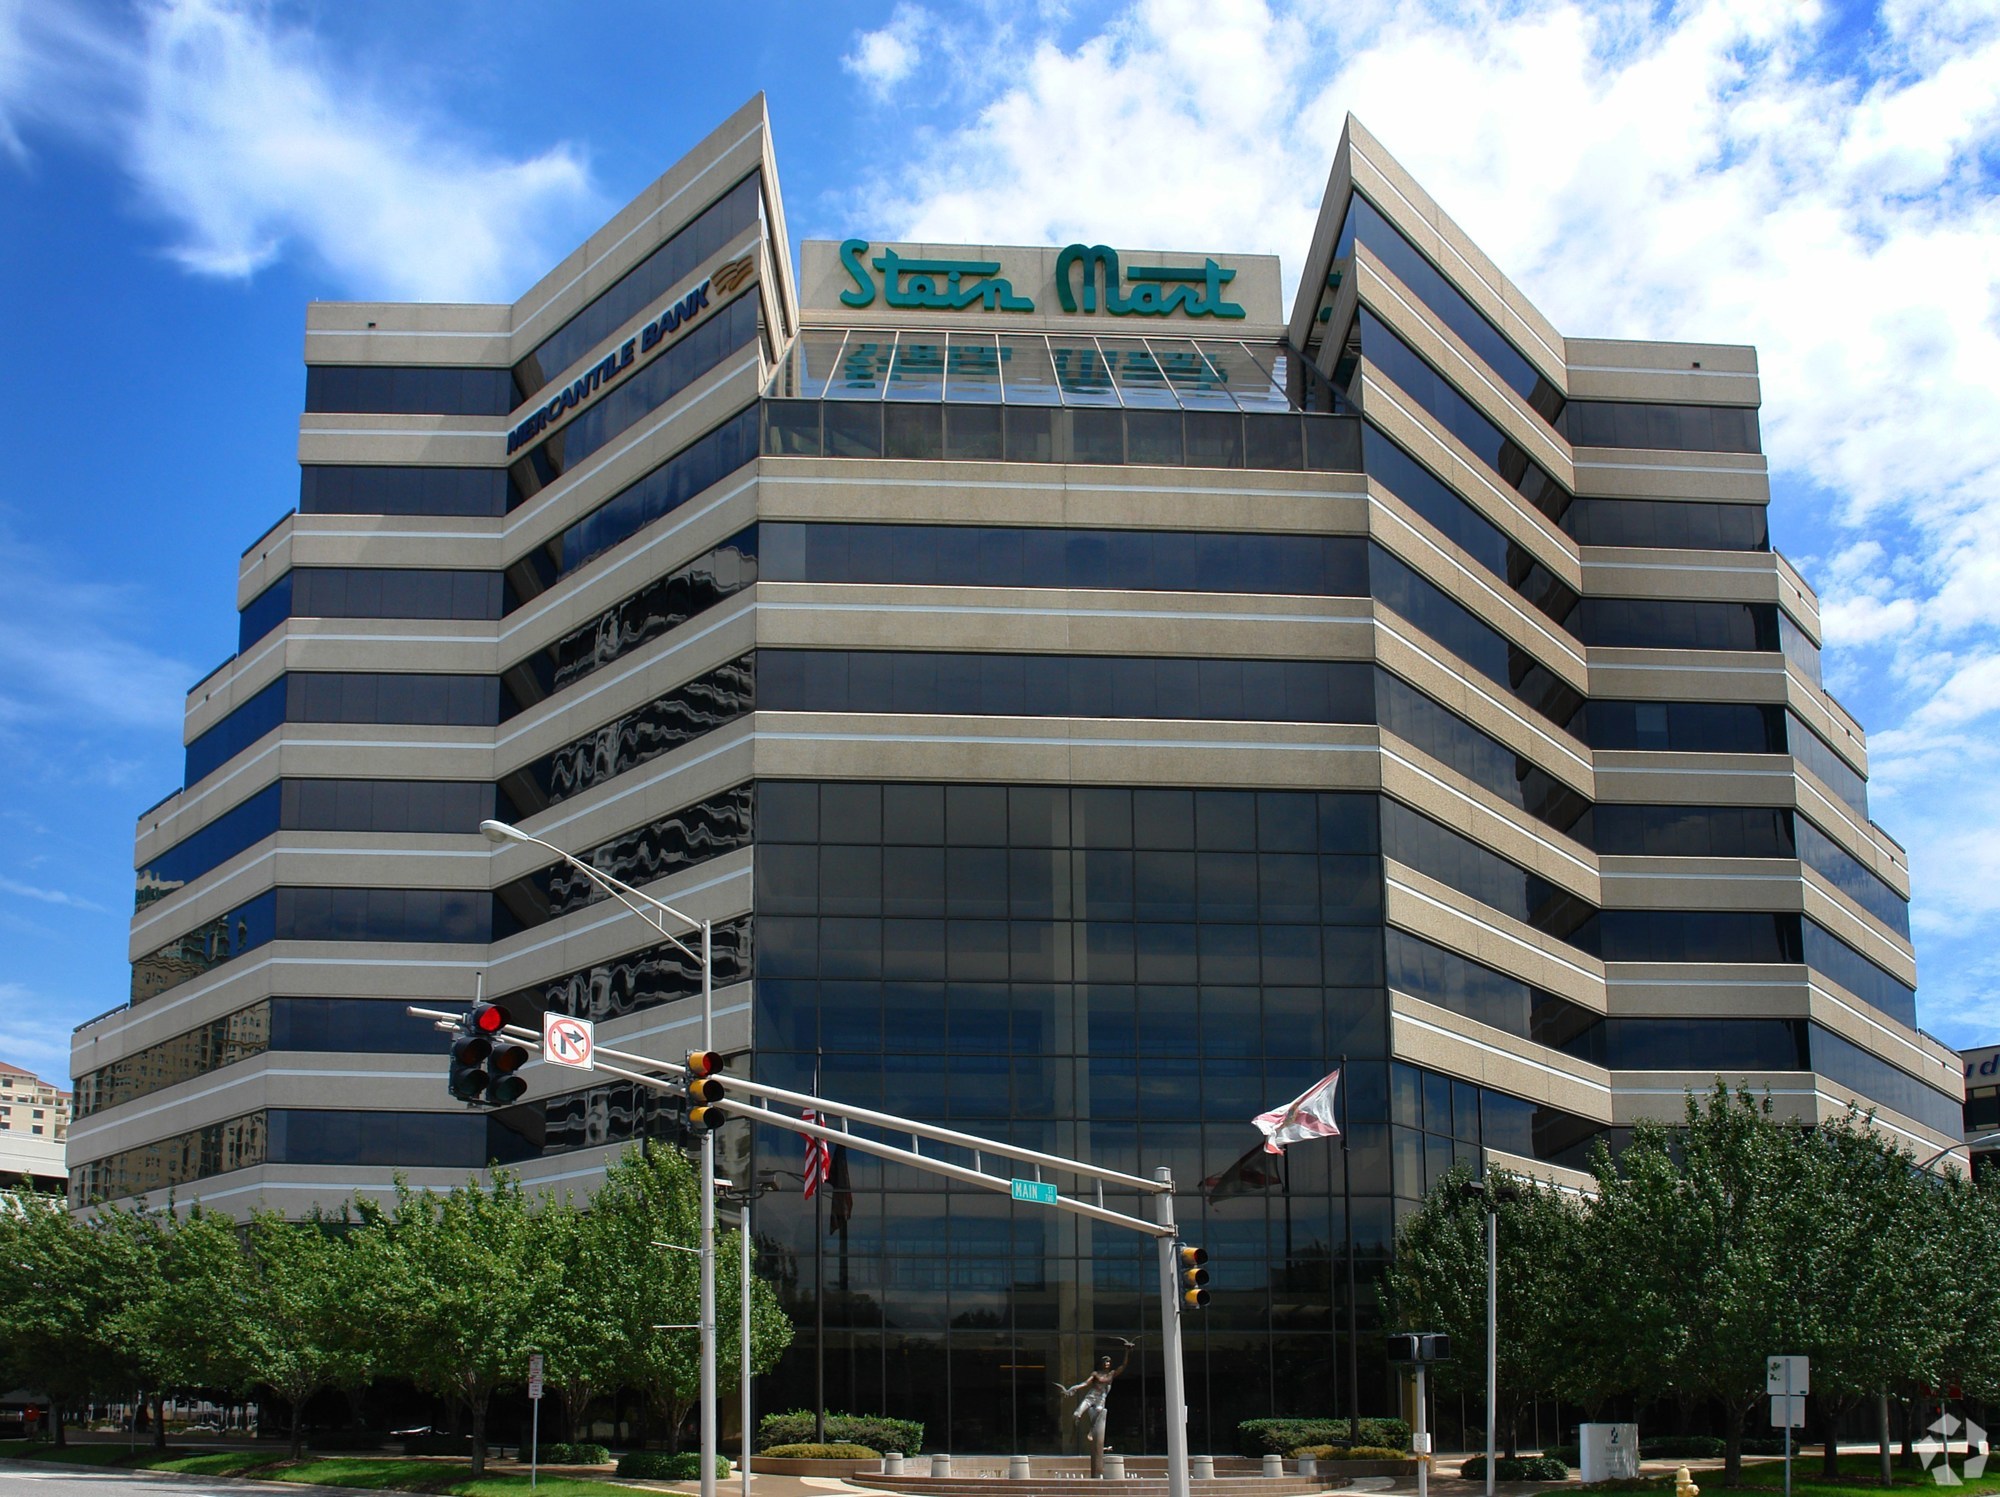 The headquarters of Stein Mart at 1200 Riverplace Blvd. on the Downtown Southbank.